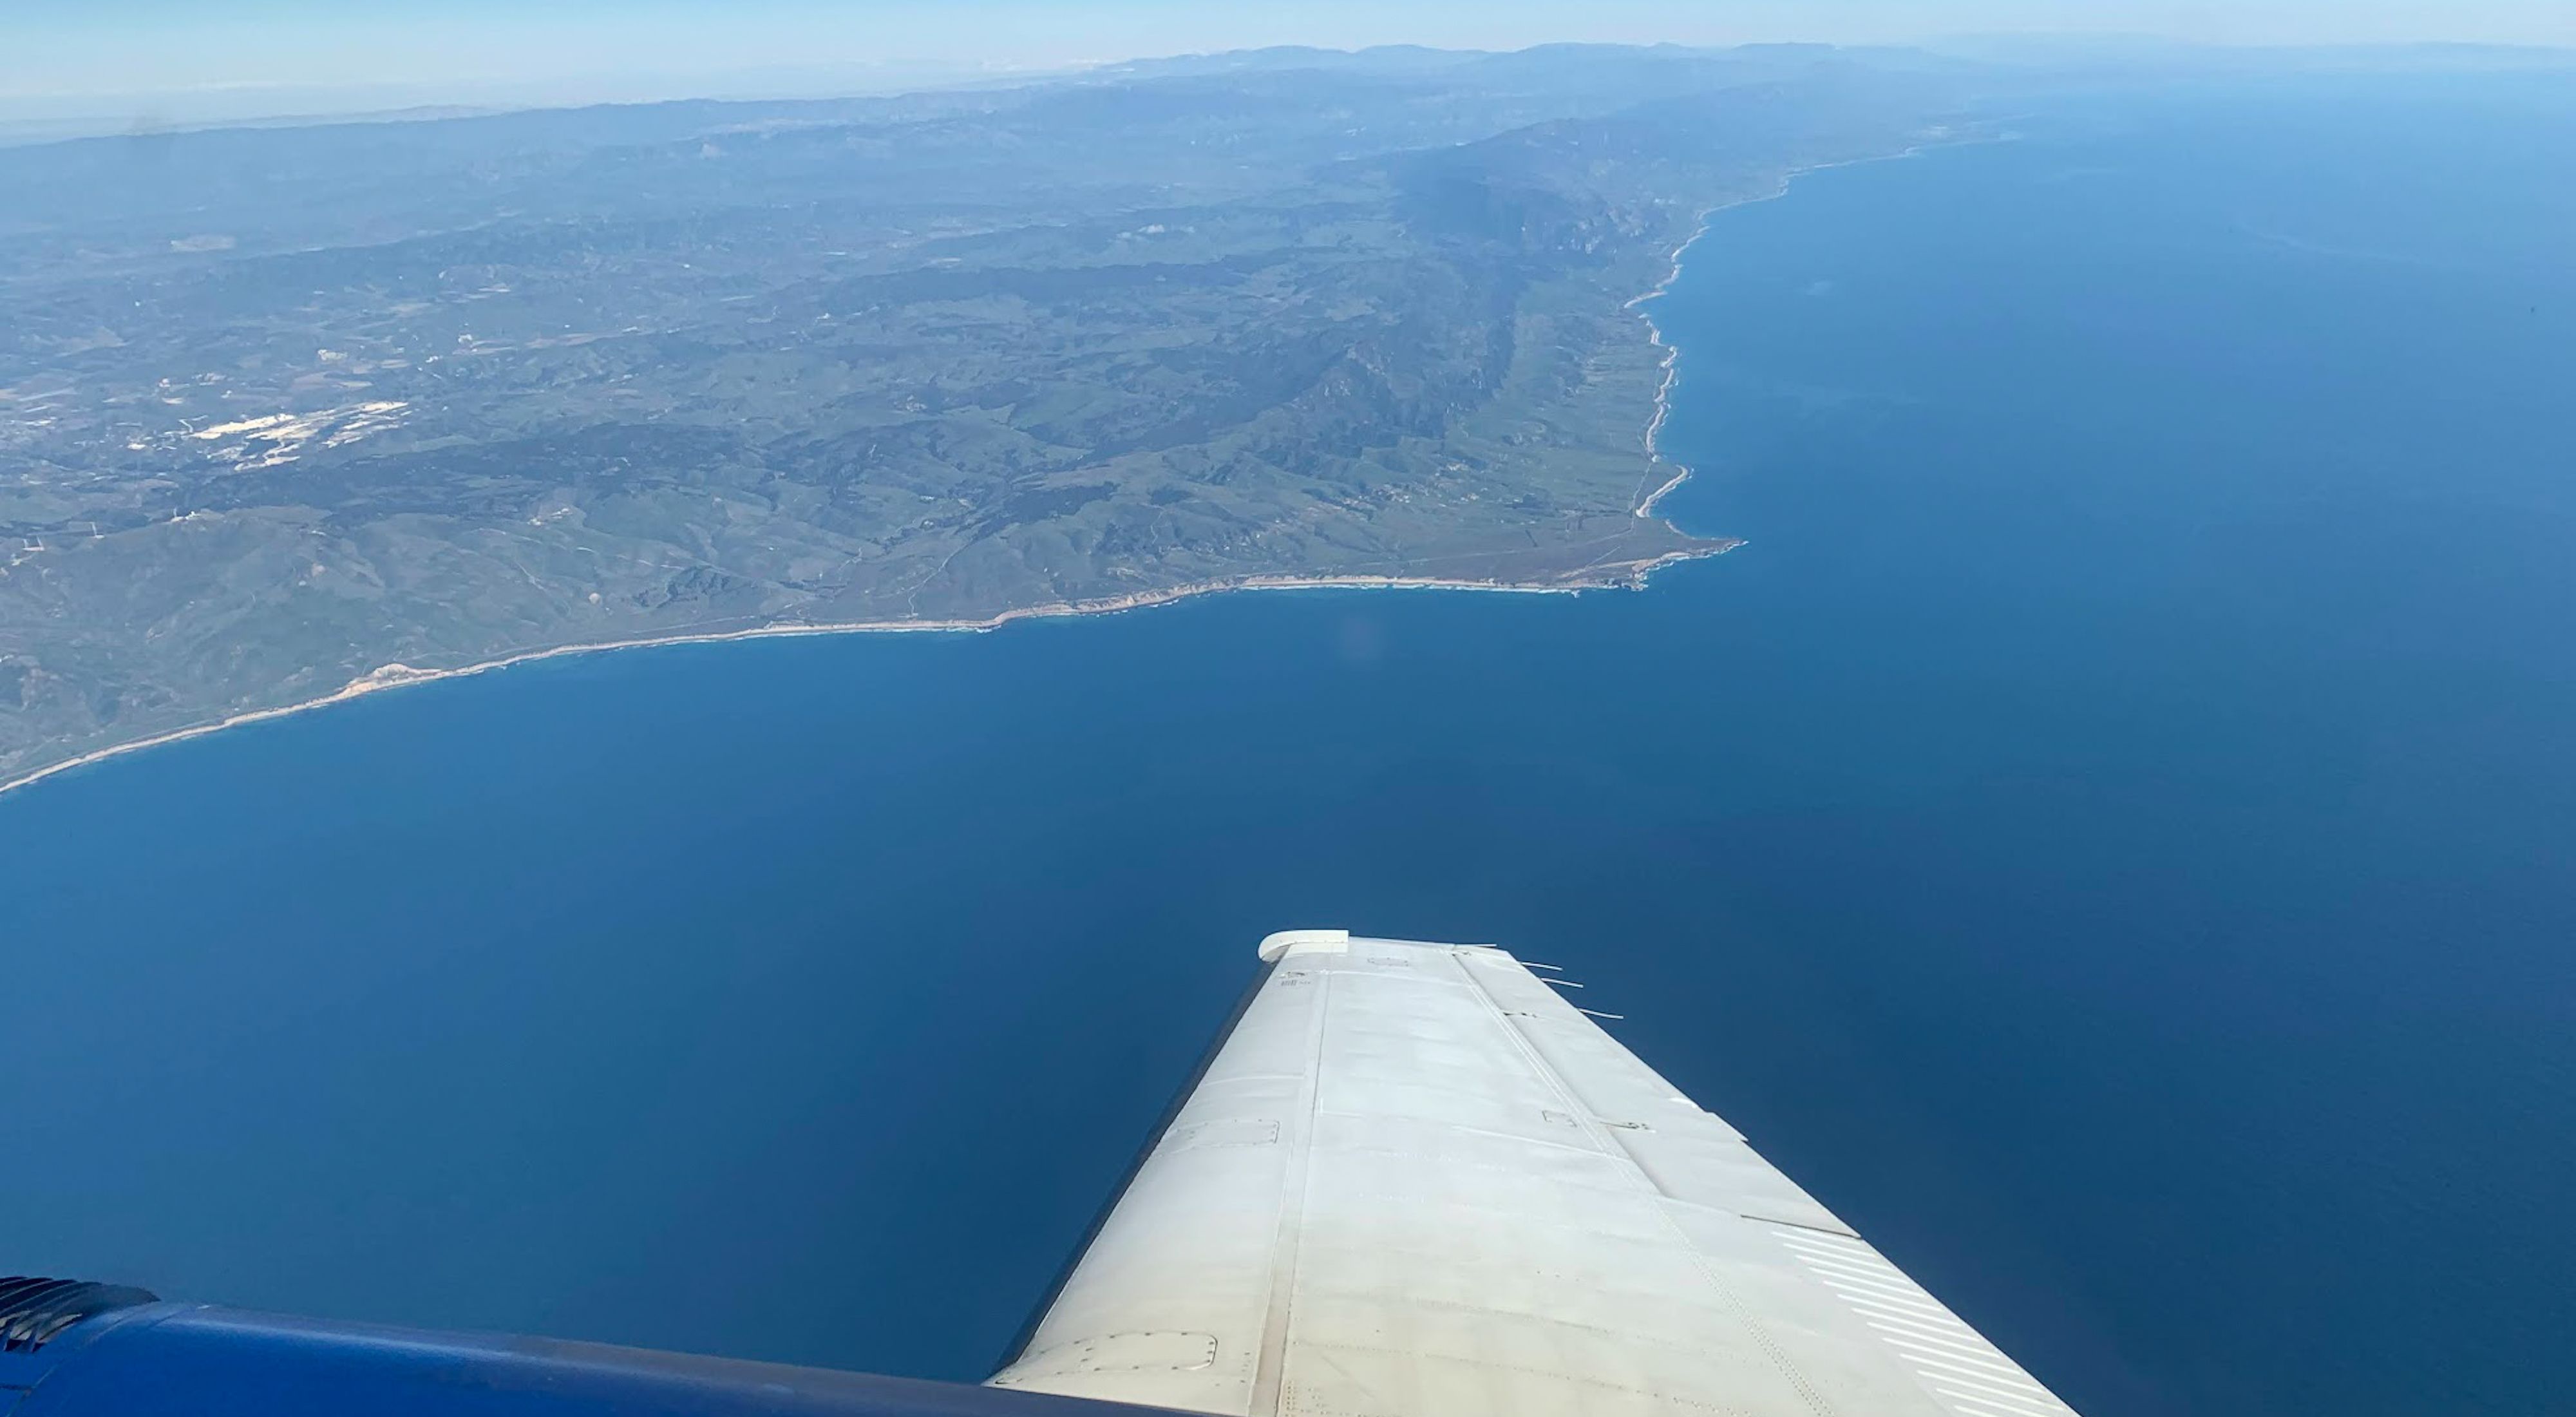 Looking out the window of a research plane collecting spectral imaging data of vegetation on land and in the ocean as part of the SHIFT campaign just off the Central Coast of California.